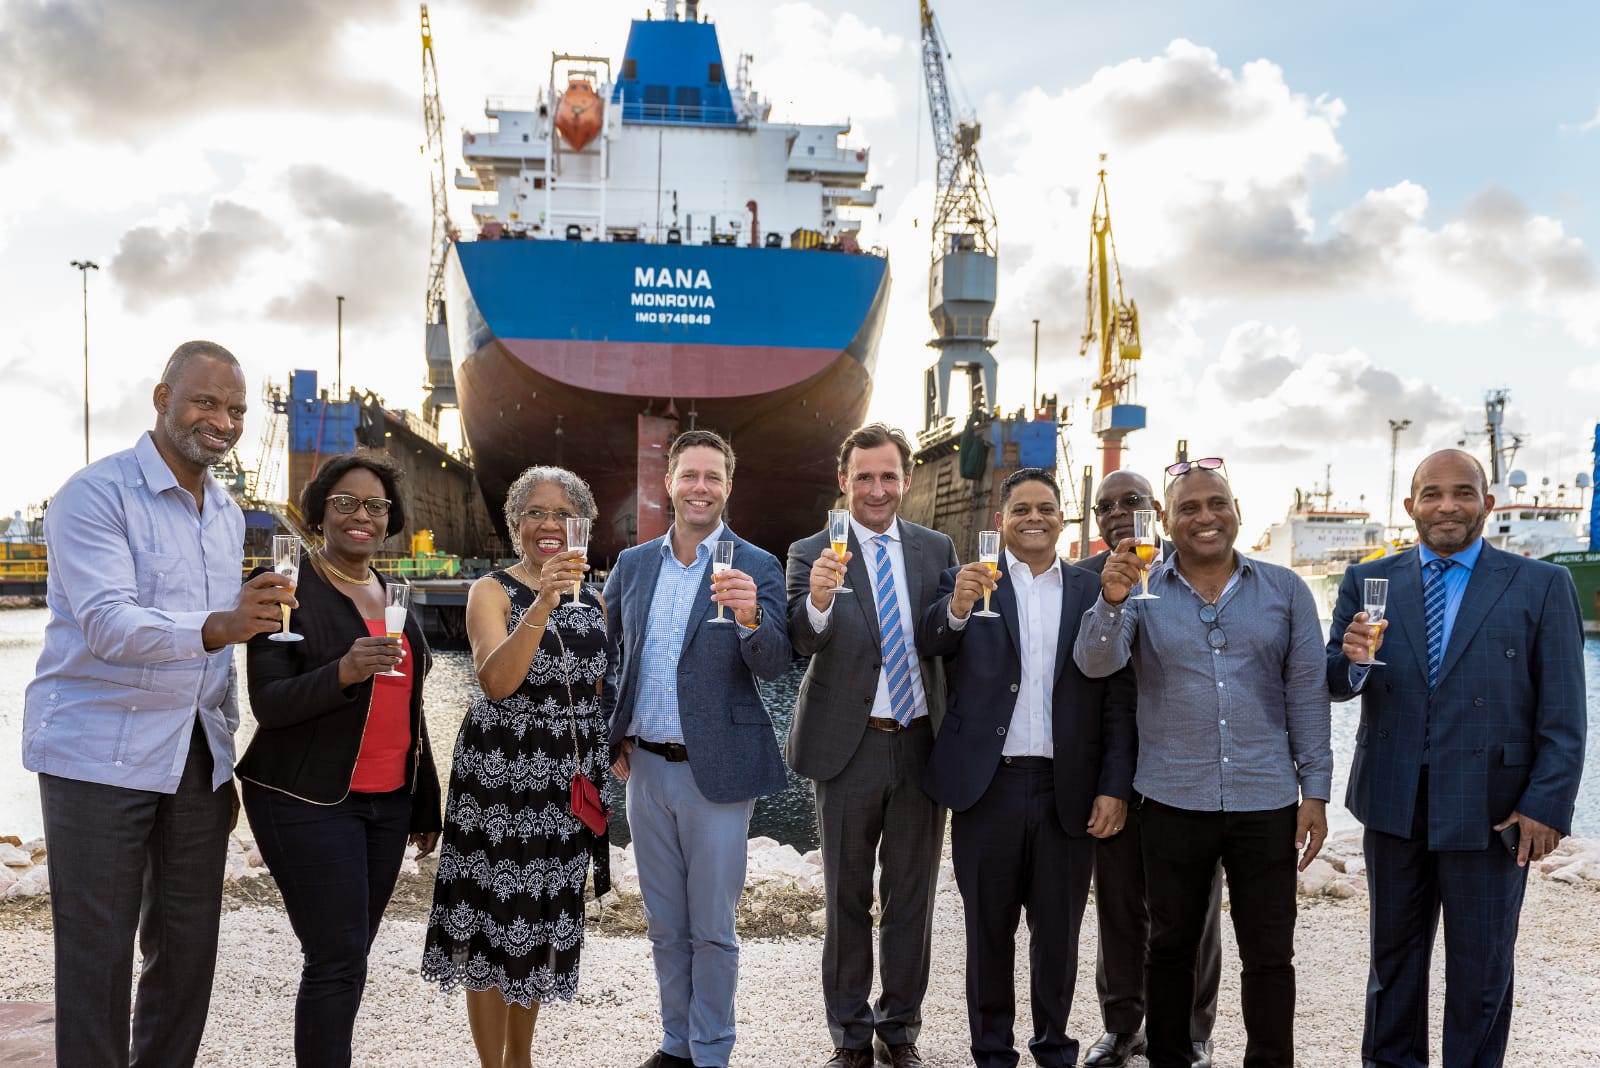 Successful completion of the Project M/V MANA of PONTOS MARINE at DAMEN Curacao Shipyard. Extensive bottom damage/steel renewal of 650 tons of steel. End 2018 – April 2019.